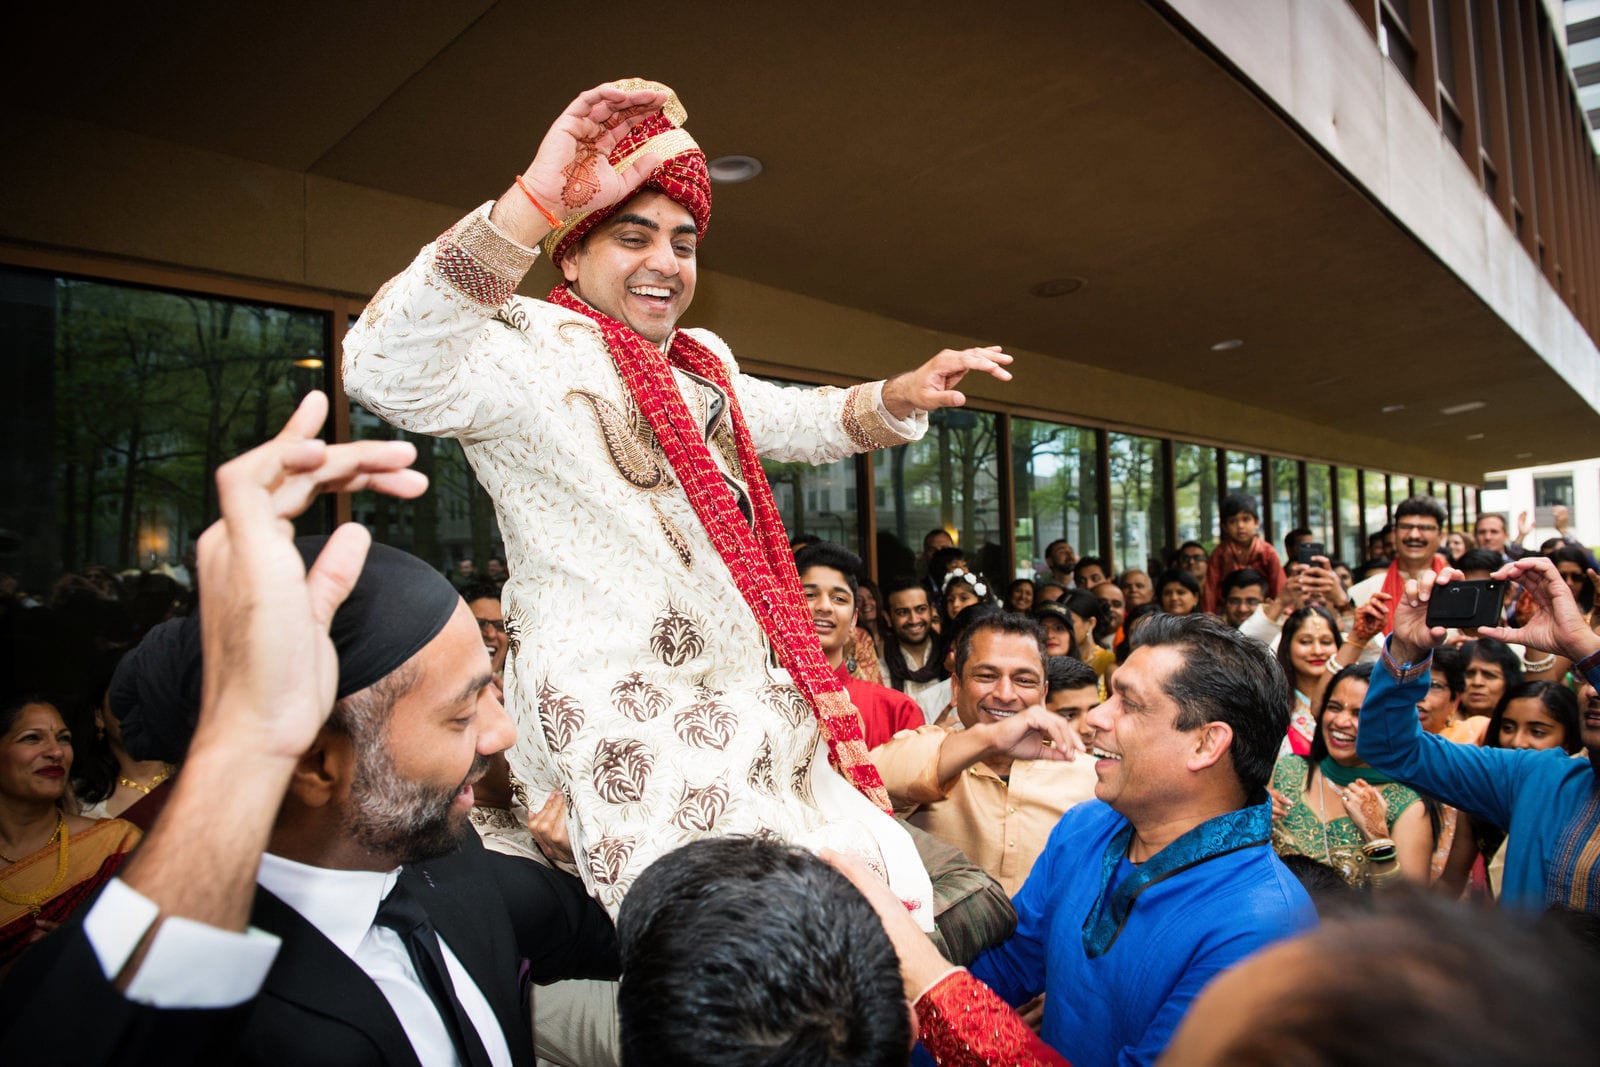 An South Asian groom dressed in traditional garb is held in the air by his guests before his wedding at the Wyndham Grand hotel in Pittsburgh.